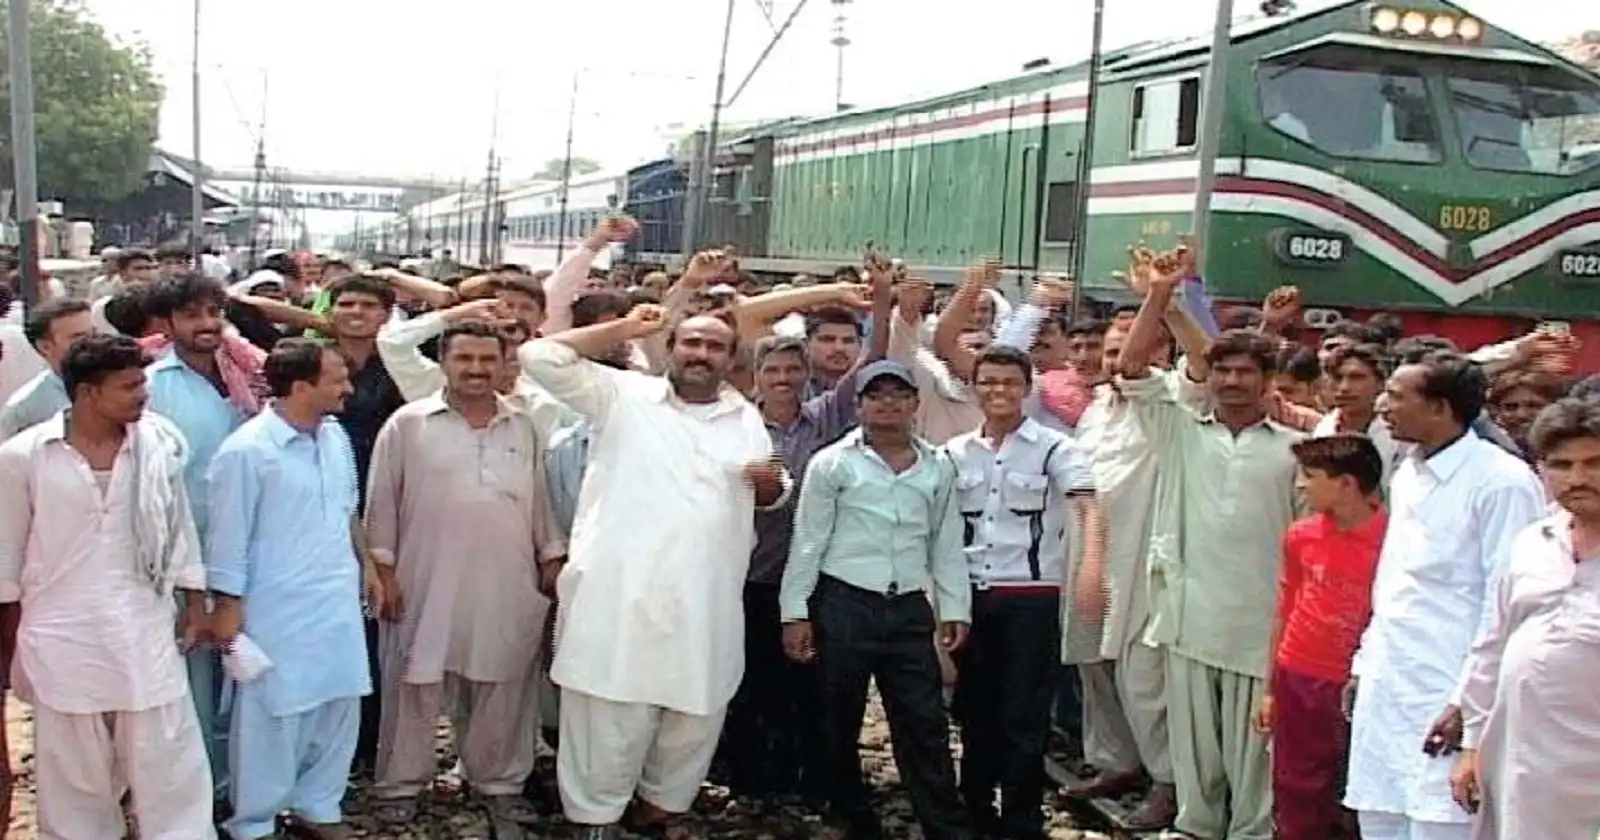 Railway workers complain of residential quarters terrible conditions